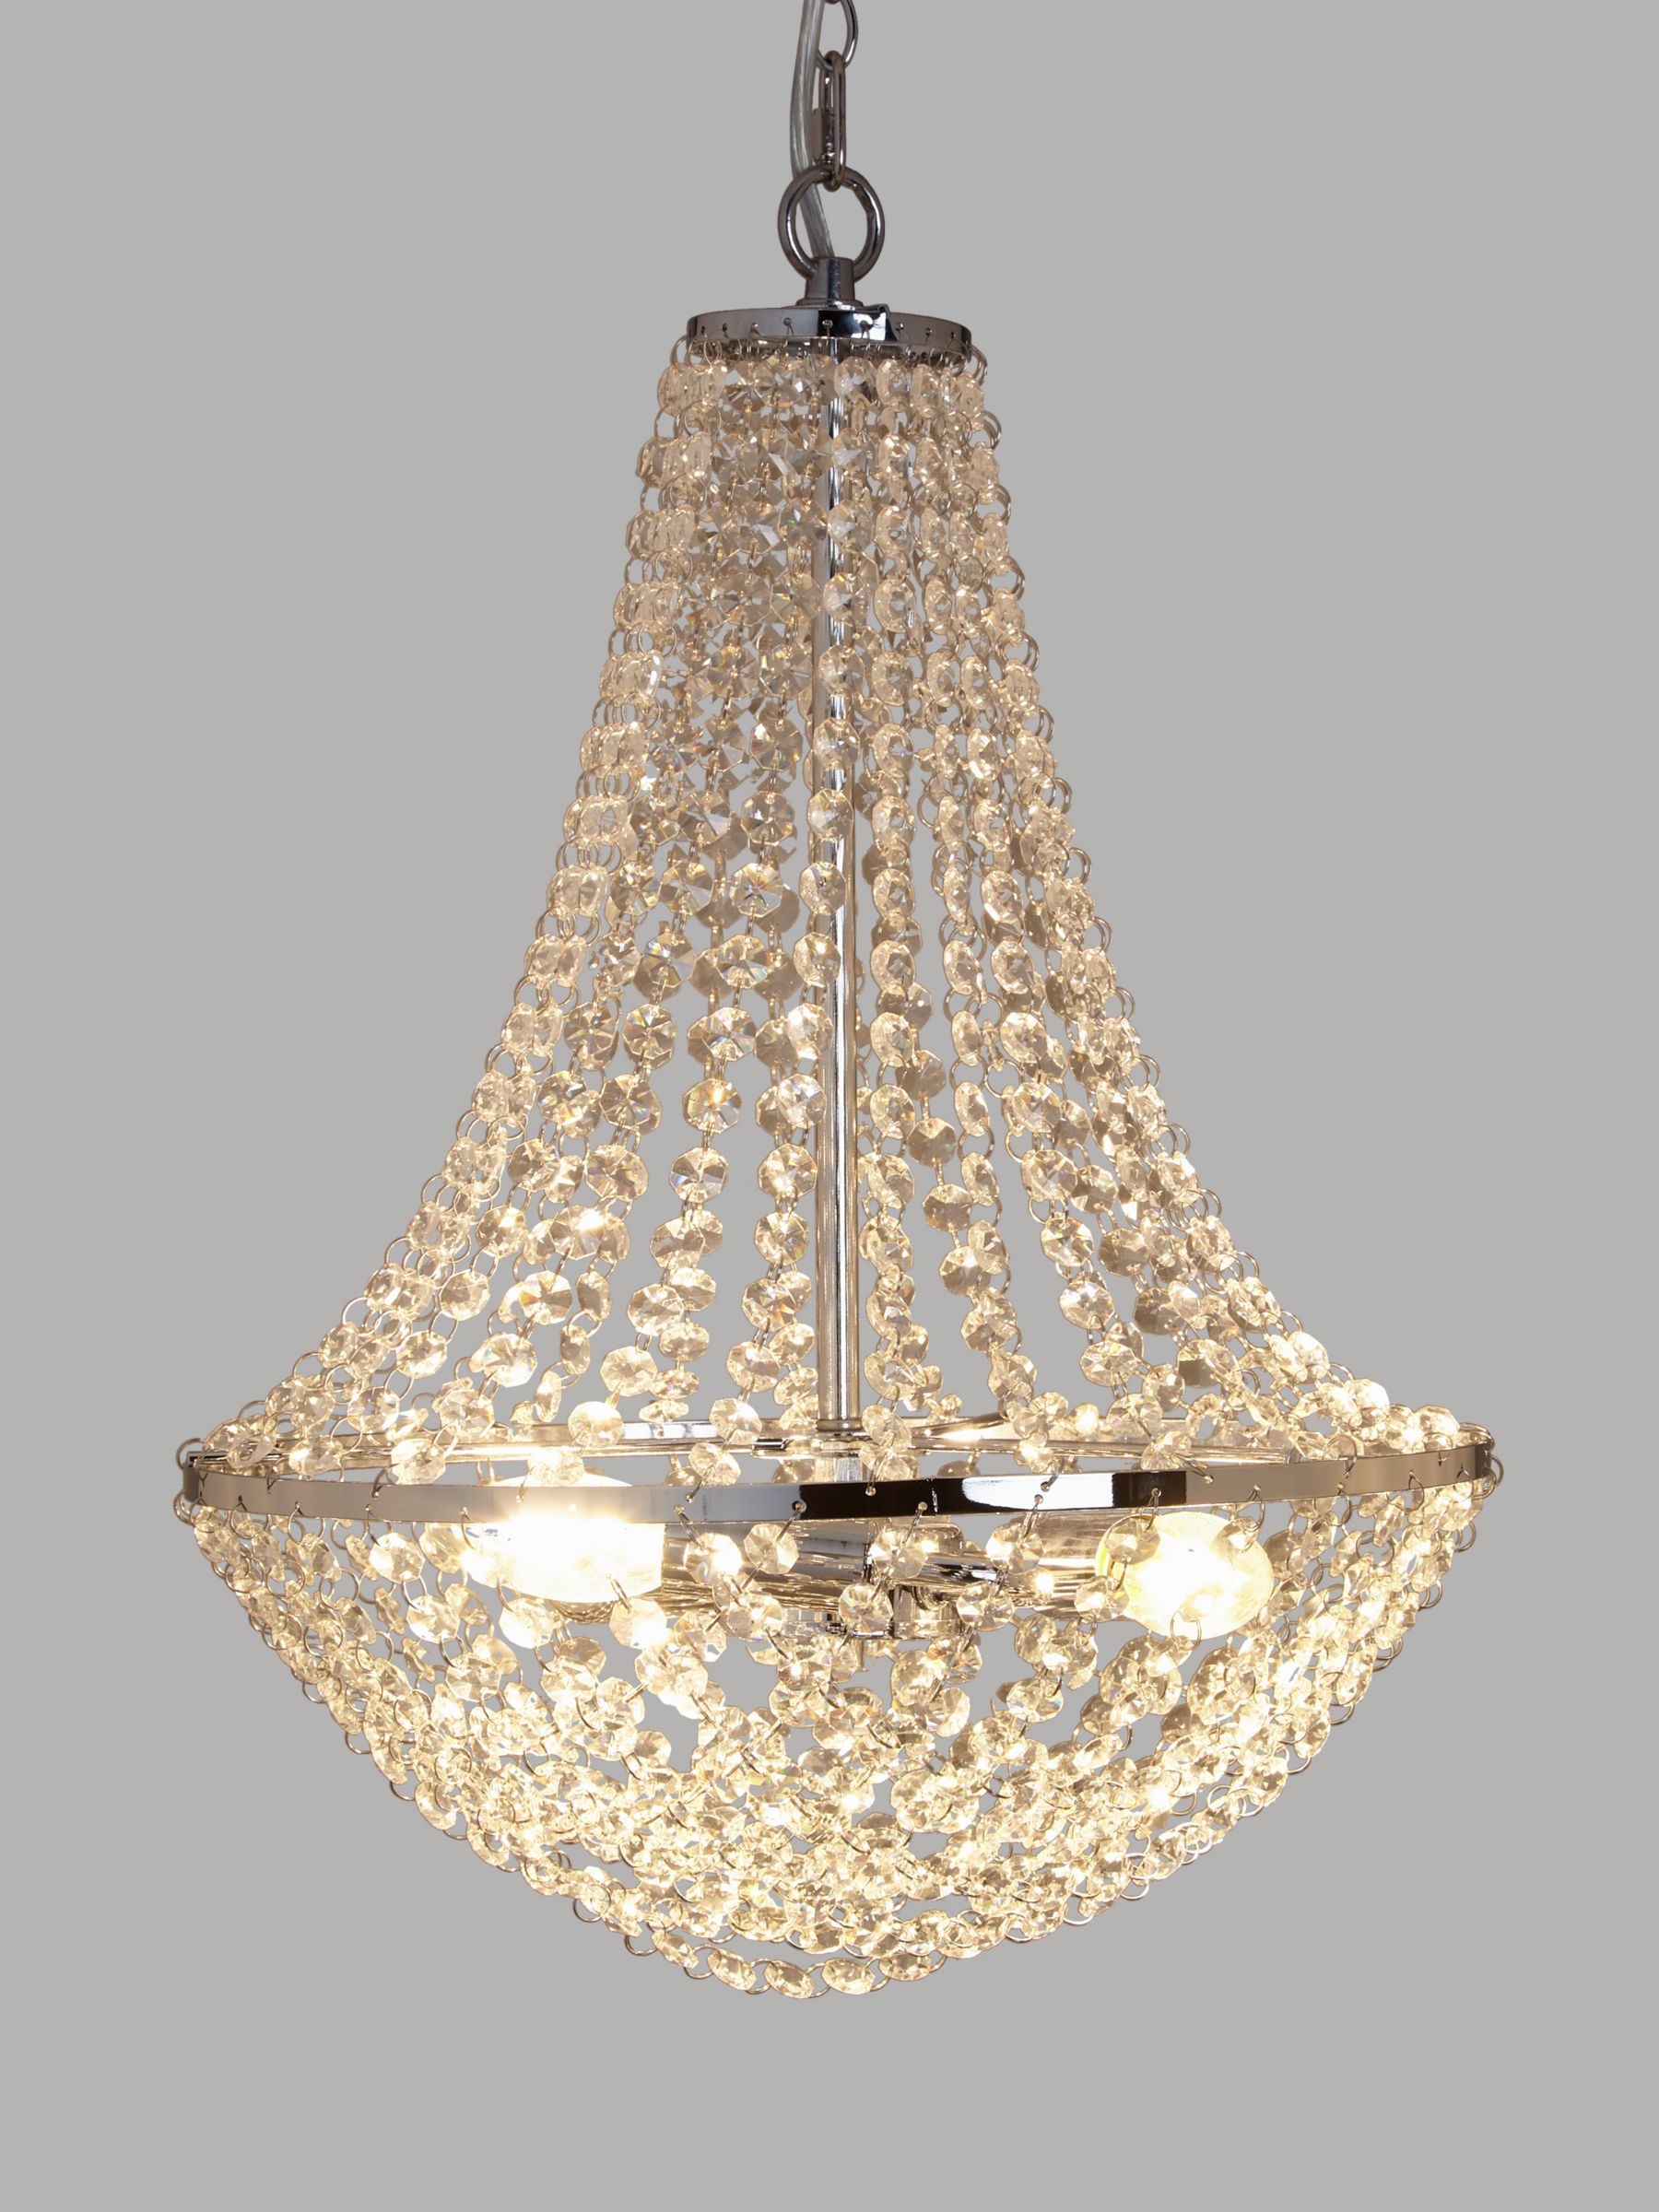 Photo of John lewis empire crystal chandelier ceiling light clear